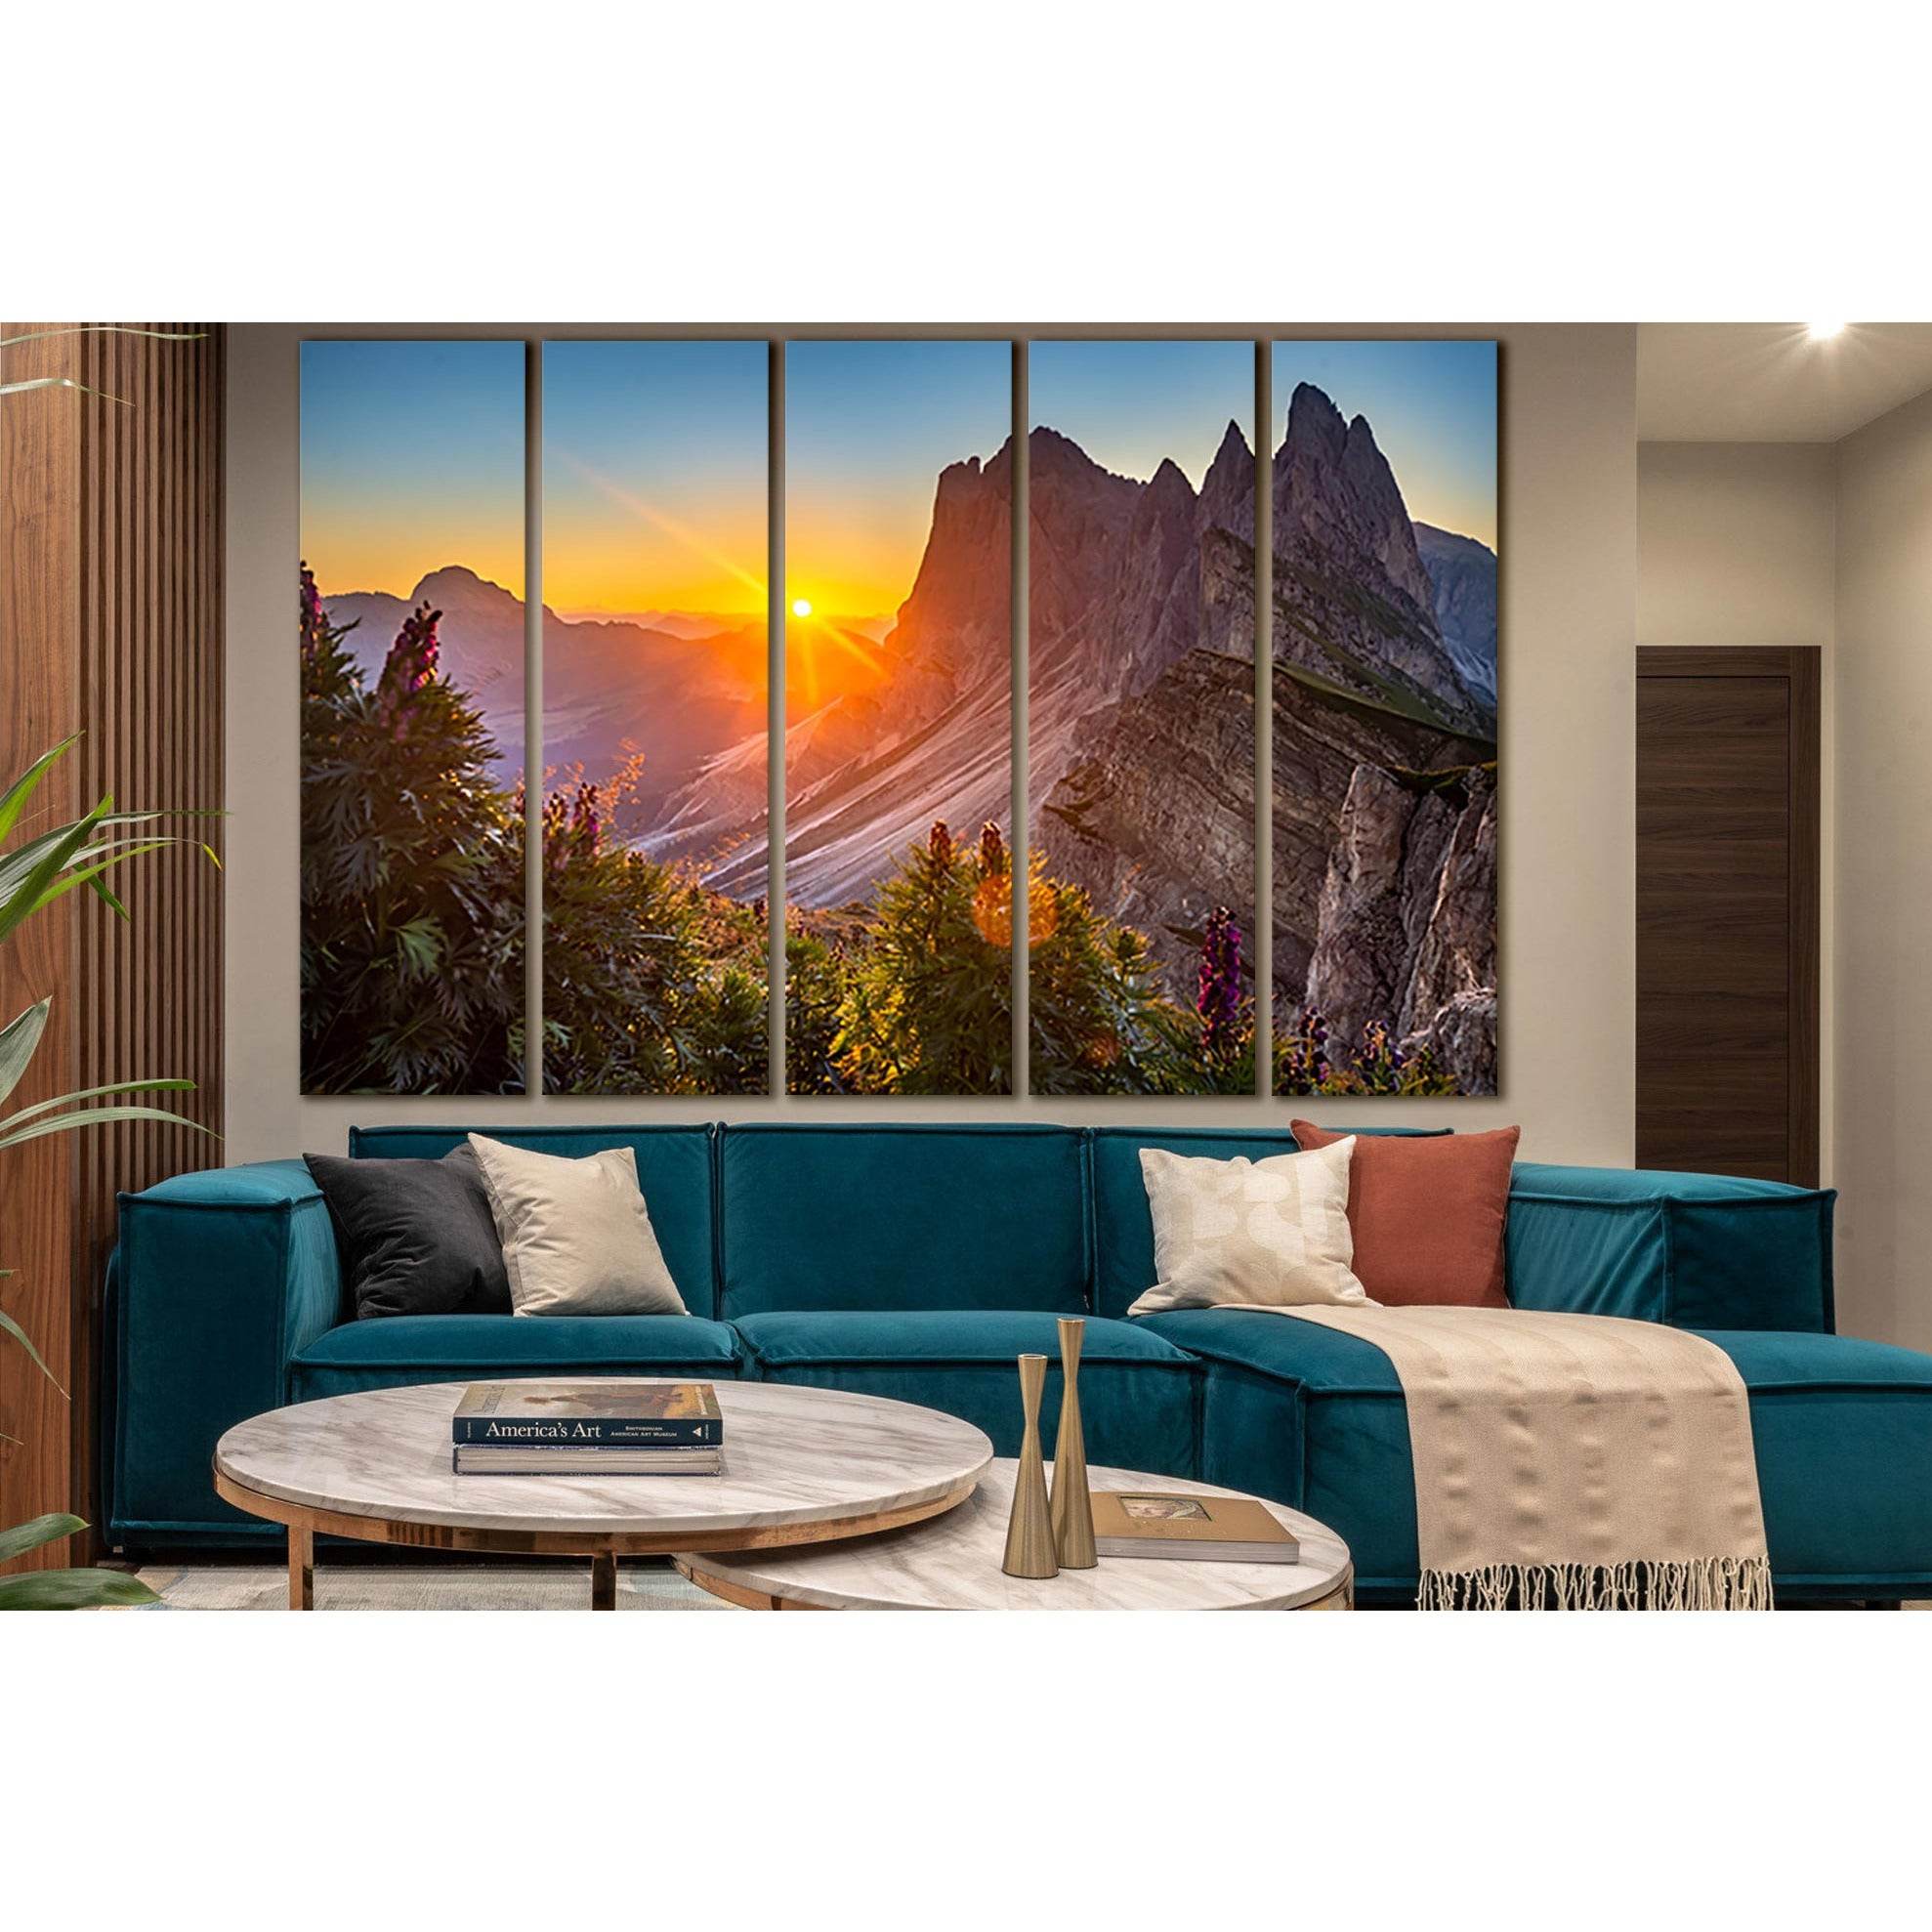 Sunrise At The Dolomites Italy №SL1586 Ready to Hang Canvas Print